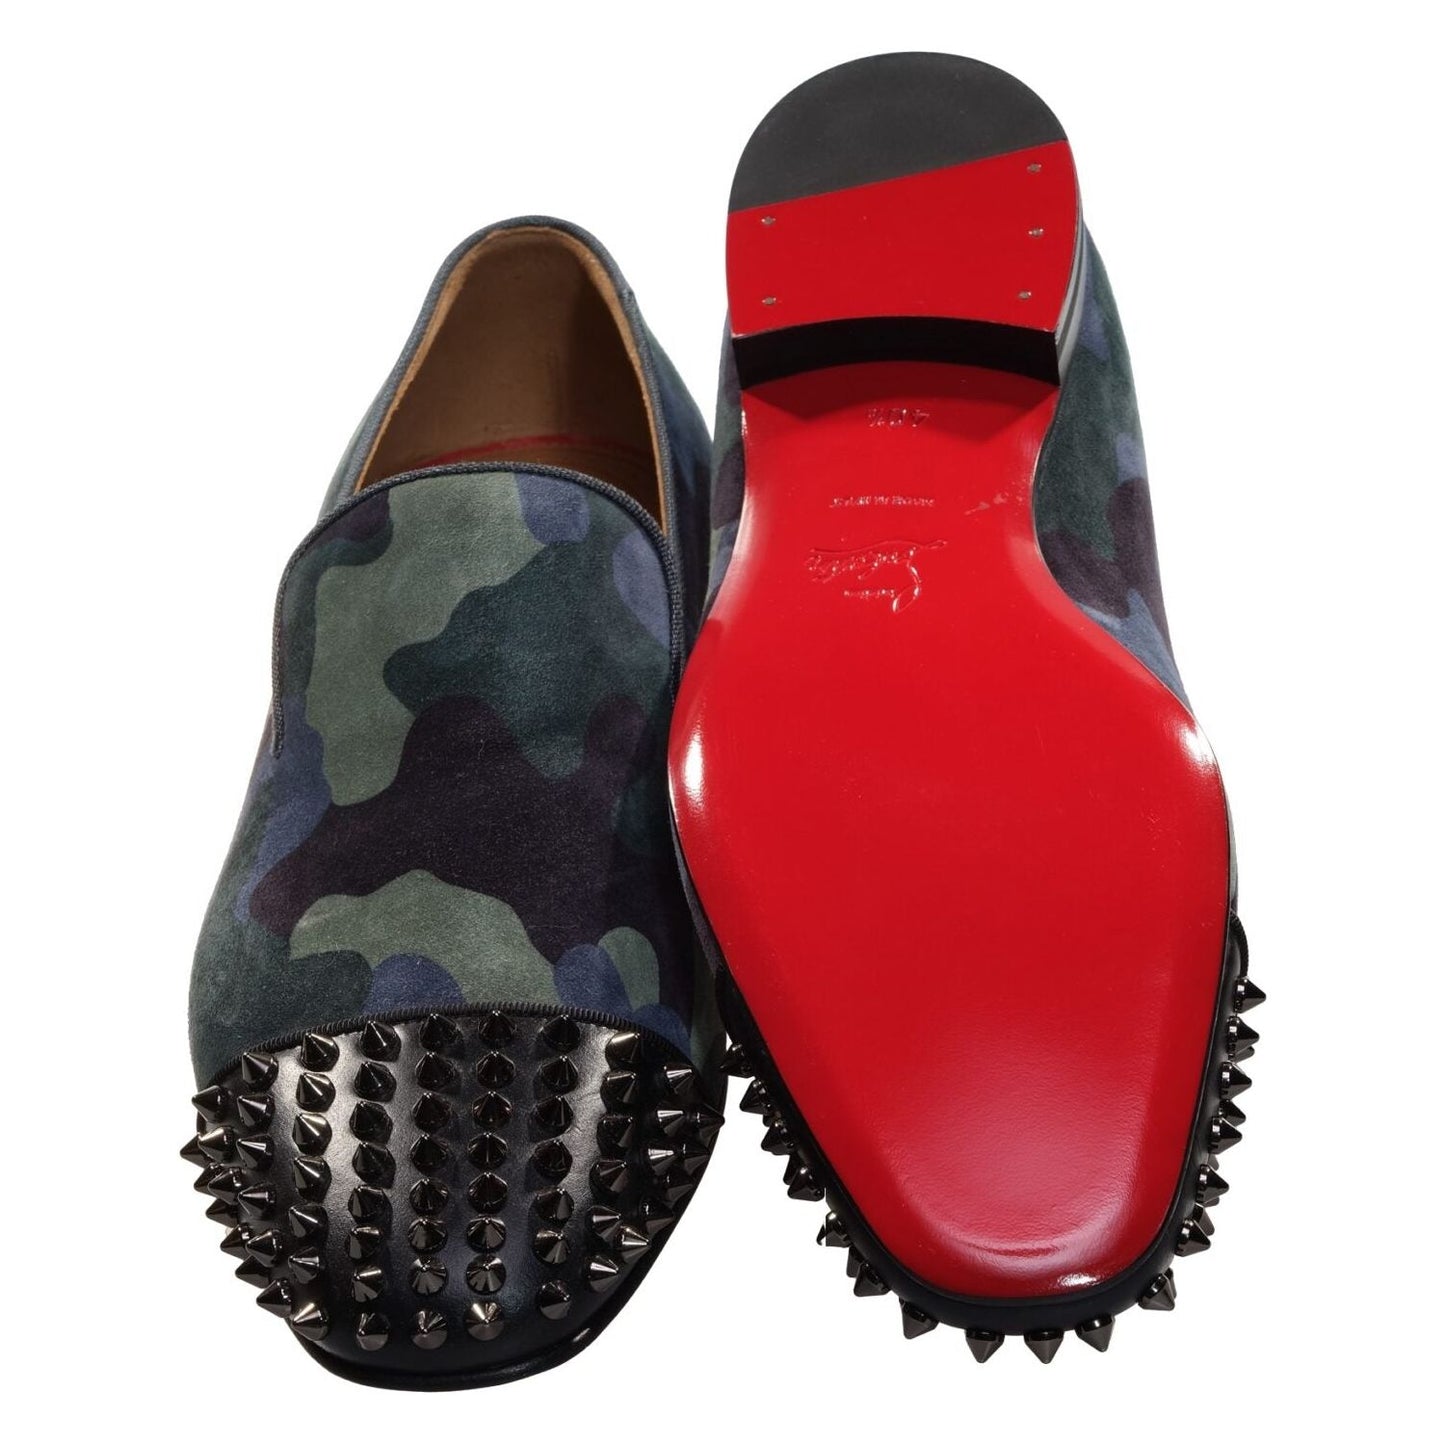 Spooky Flat Camouflage and Studded Slip On Shoes Christian Louboutin